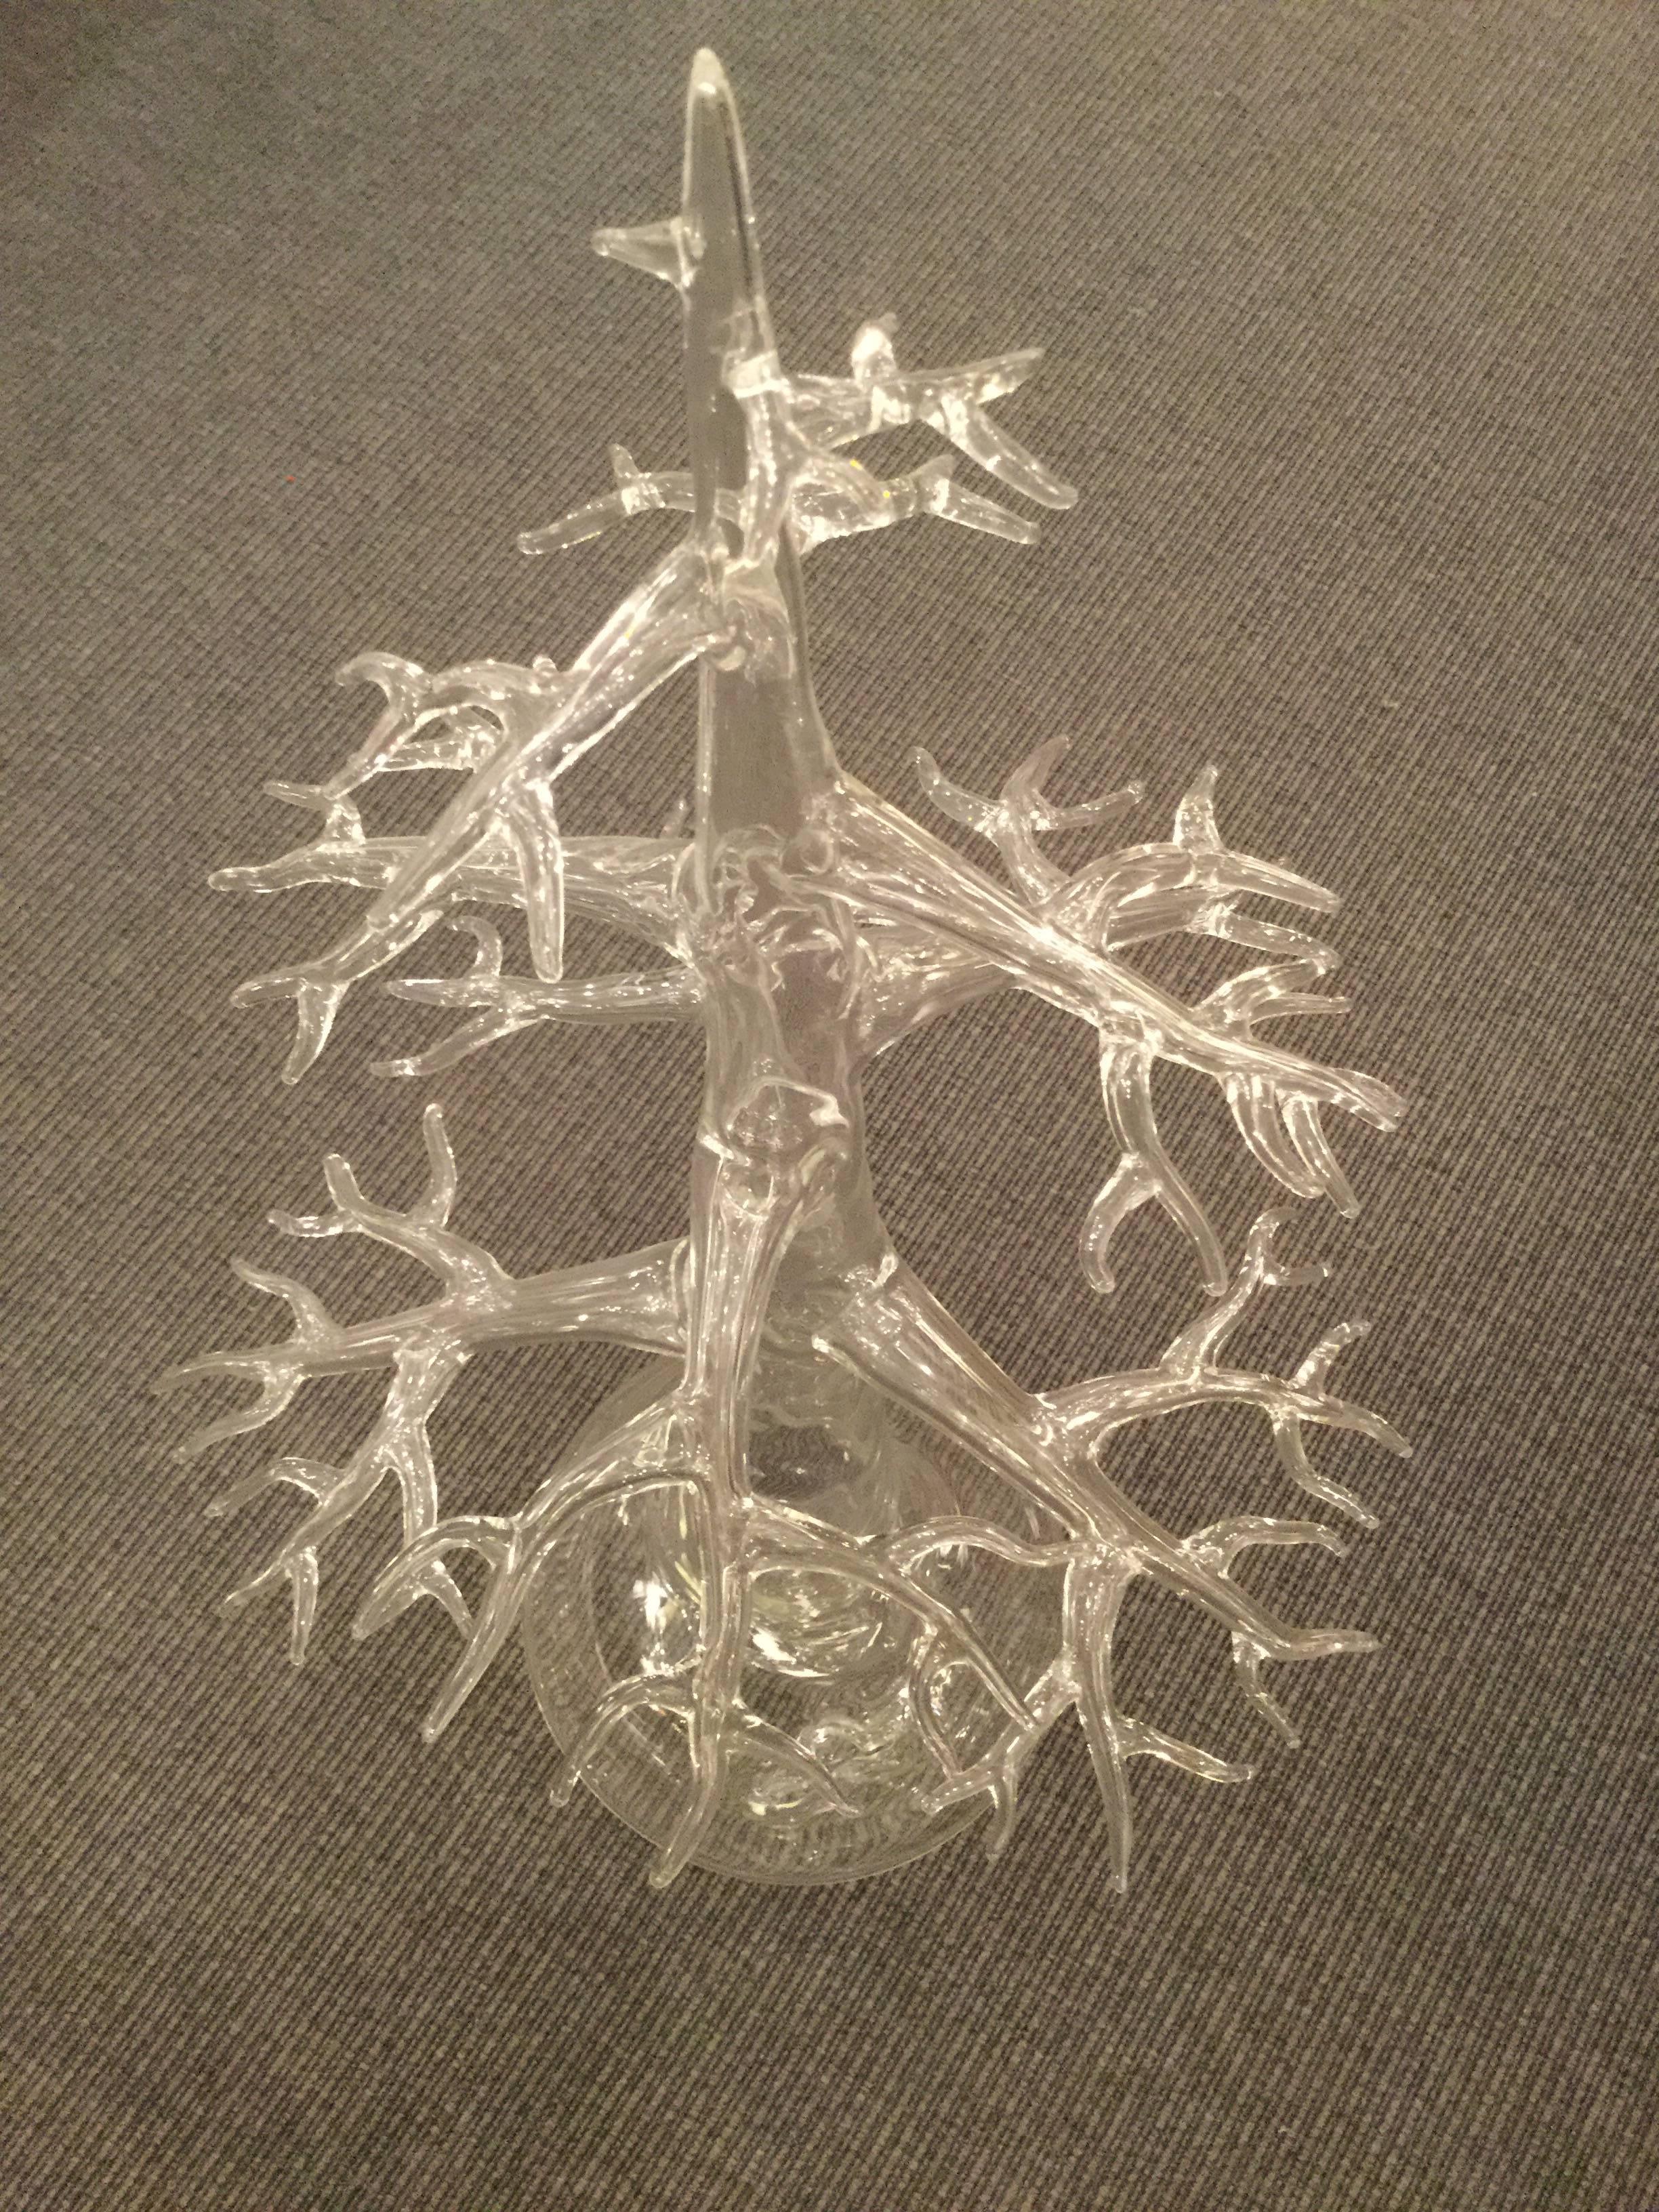 Fire-worked Borosilicate glass in the form of a miniature tree. Signed and dated on the trunk: Simone Crestani 2013.

OUR REFERENCE N8943c